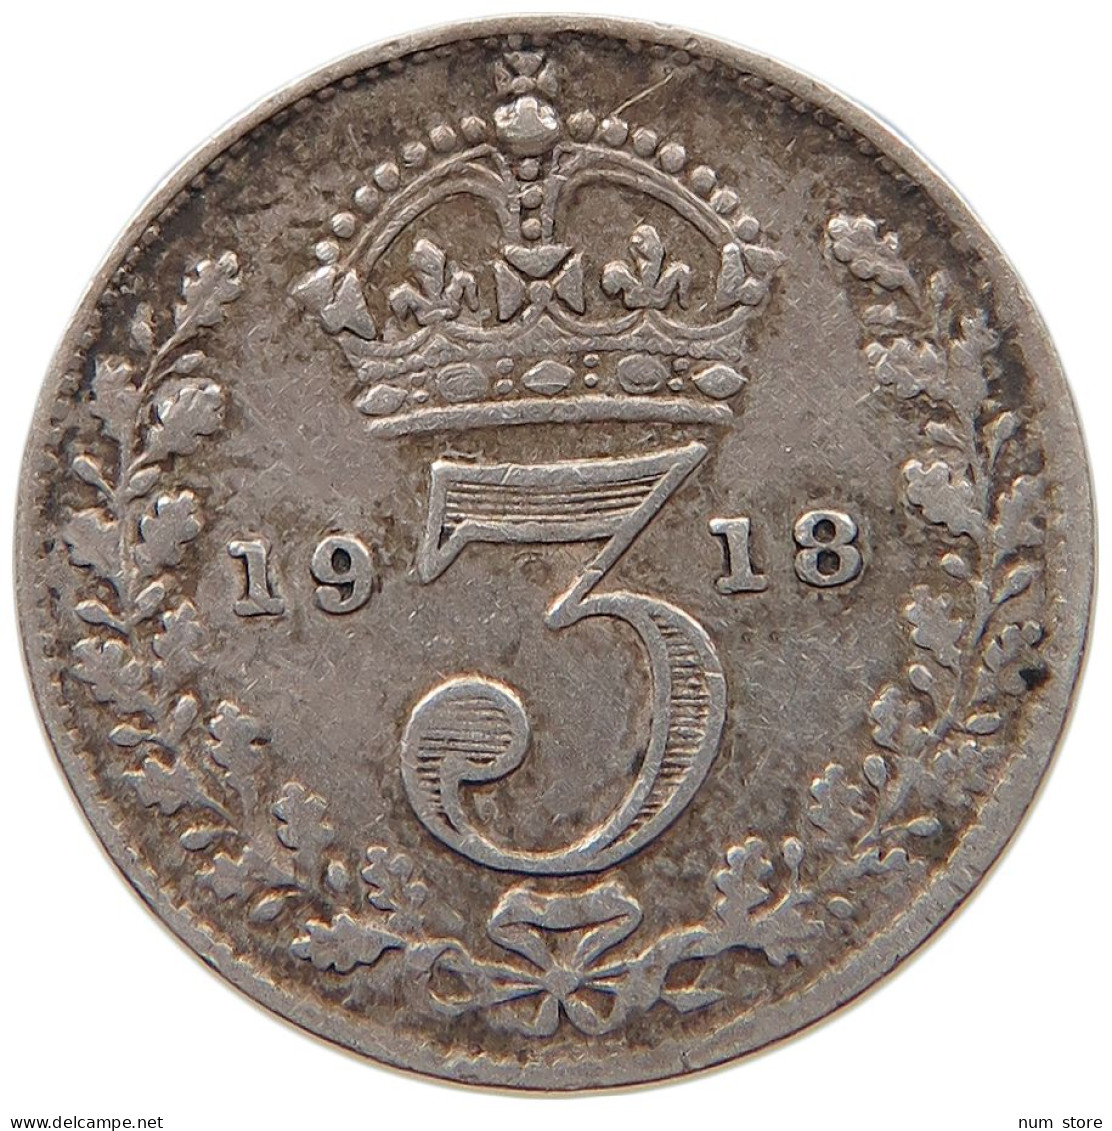 GREAT BRITAIN THREEPENCE 1918 #s004 0065 - F. 3 Pence